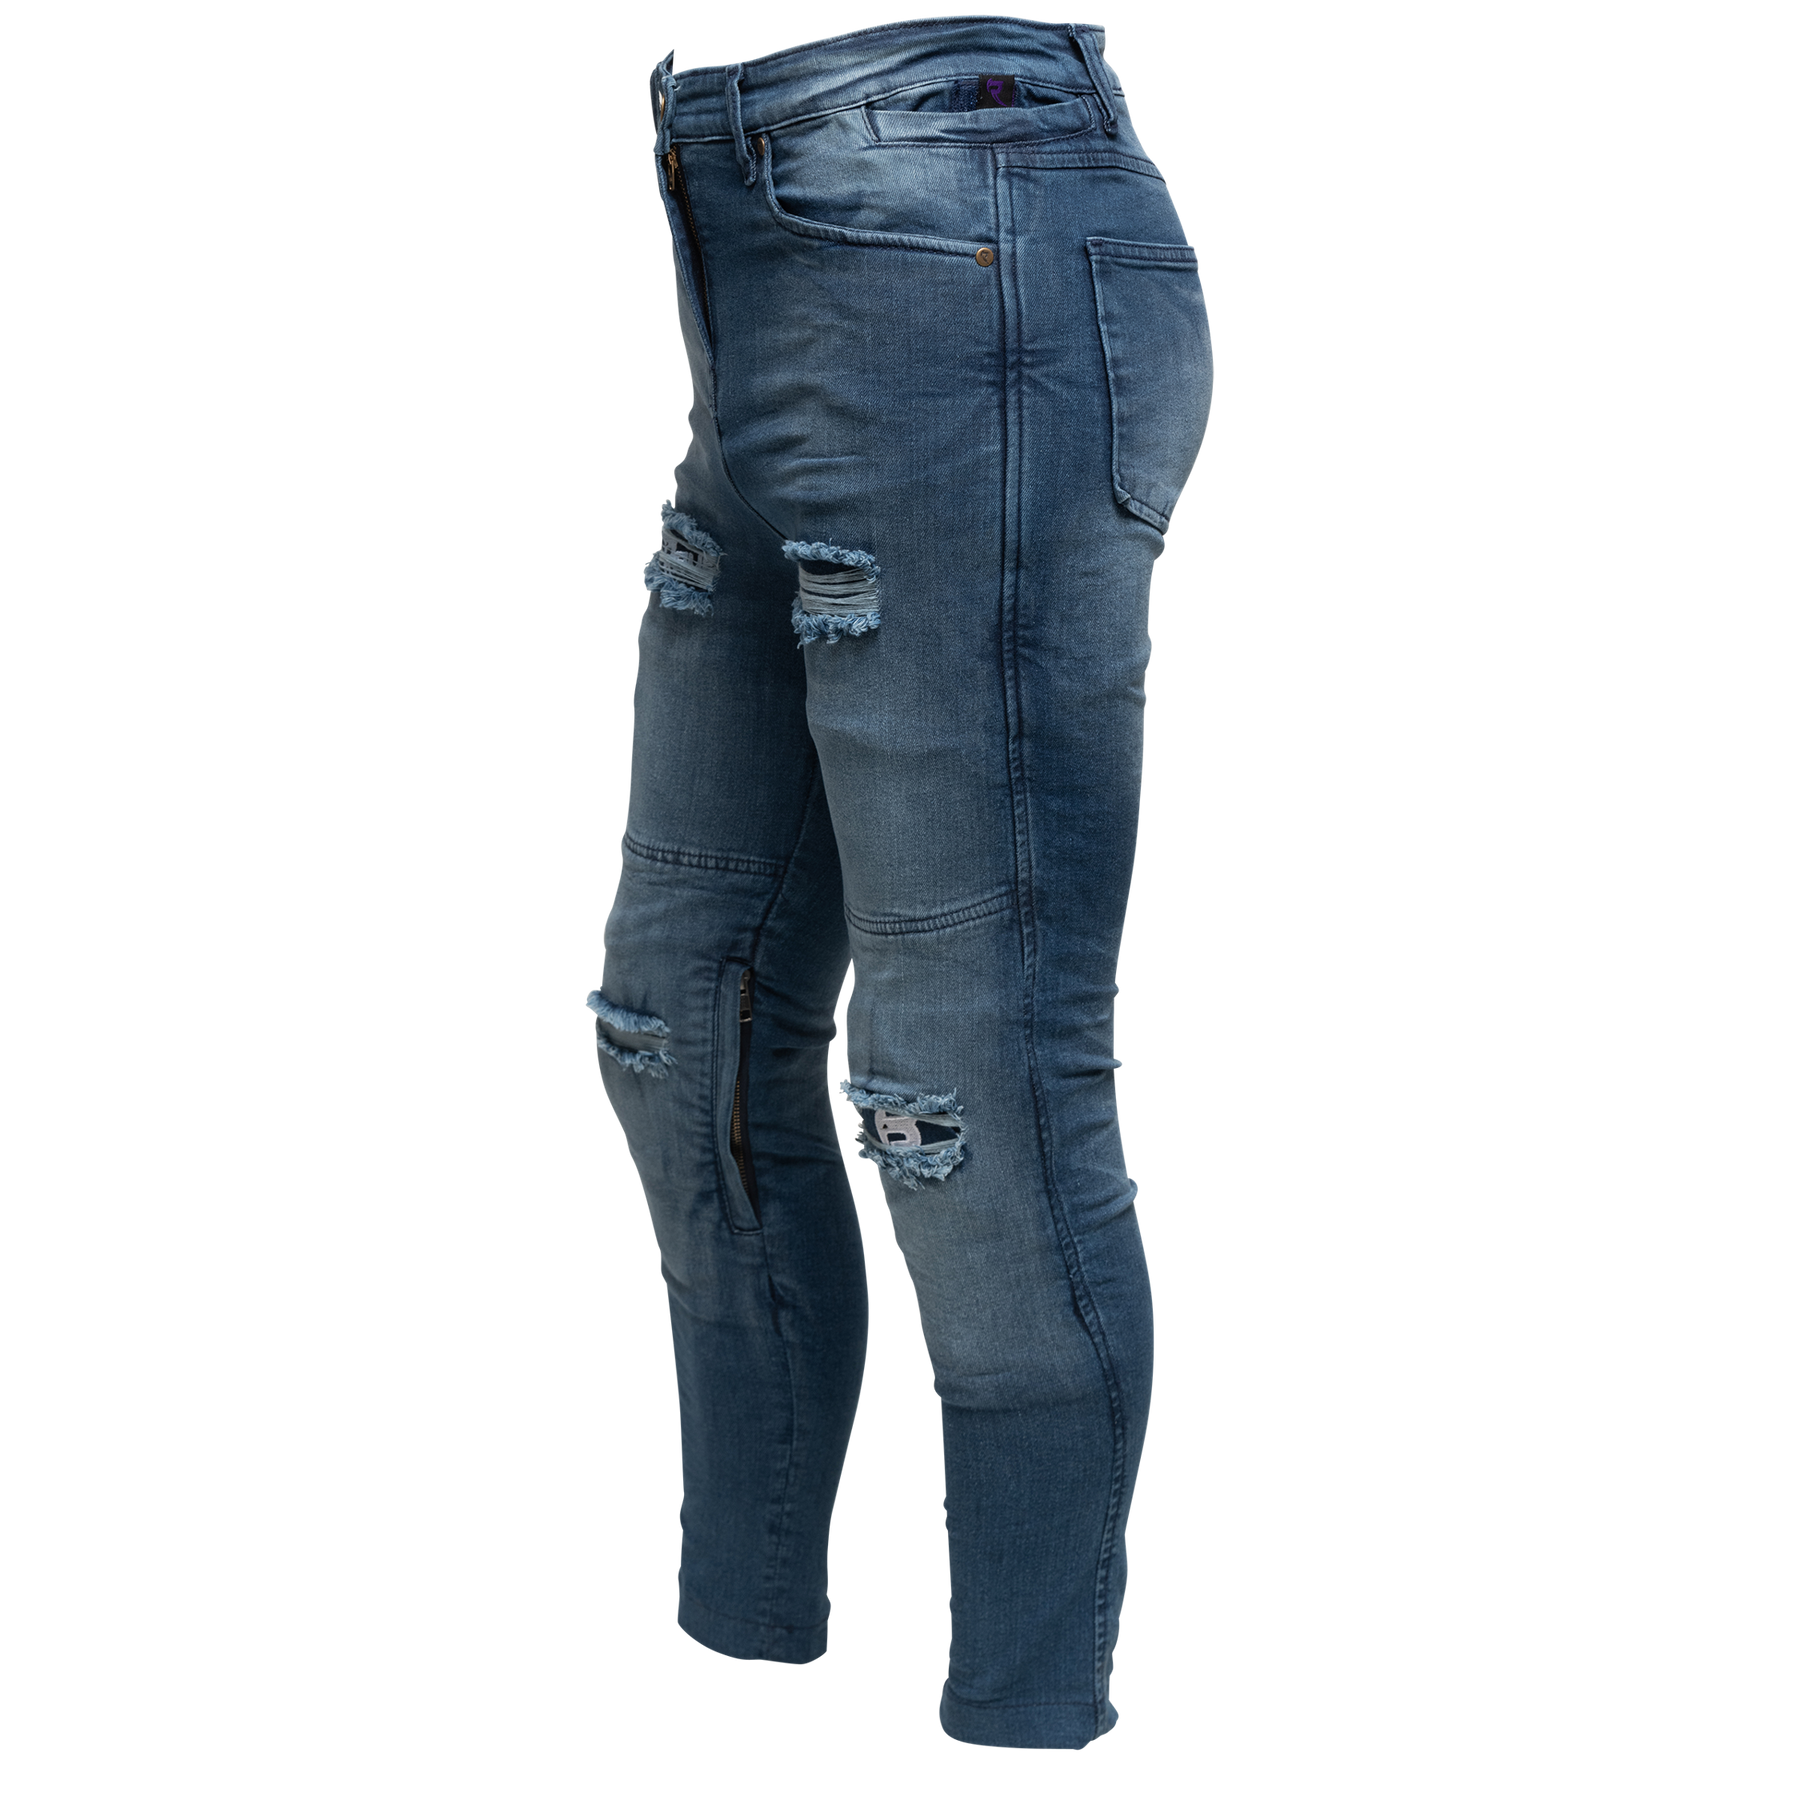 RAVEN Moto - Motorcycle Jeans  Women's High-Waisted REVOLT Ripped